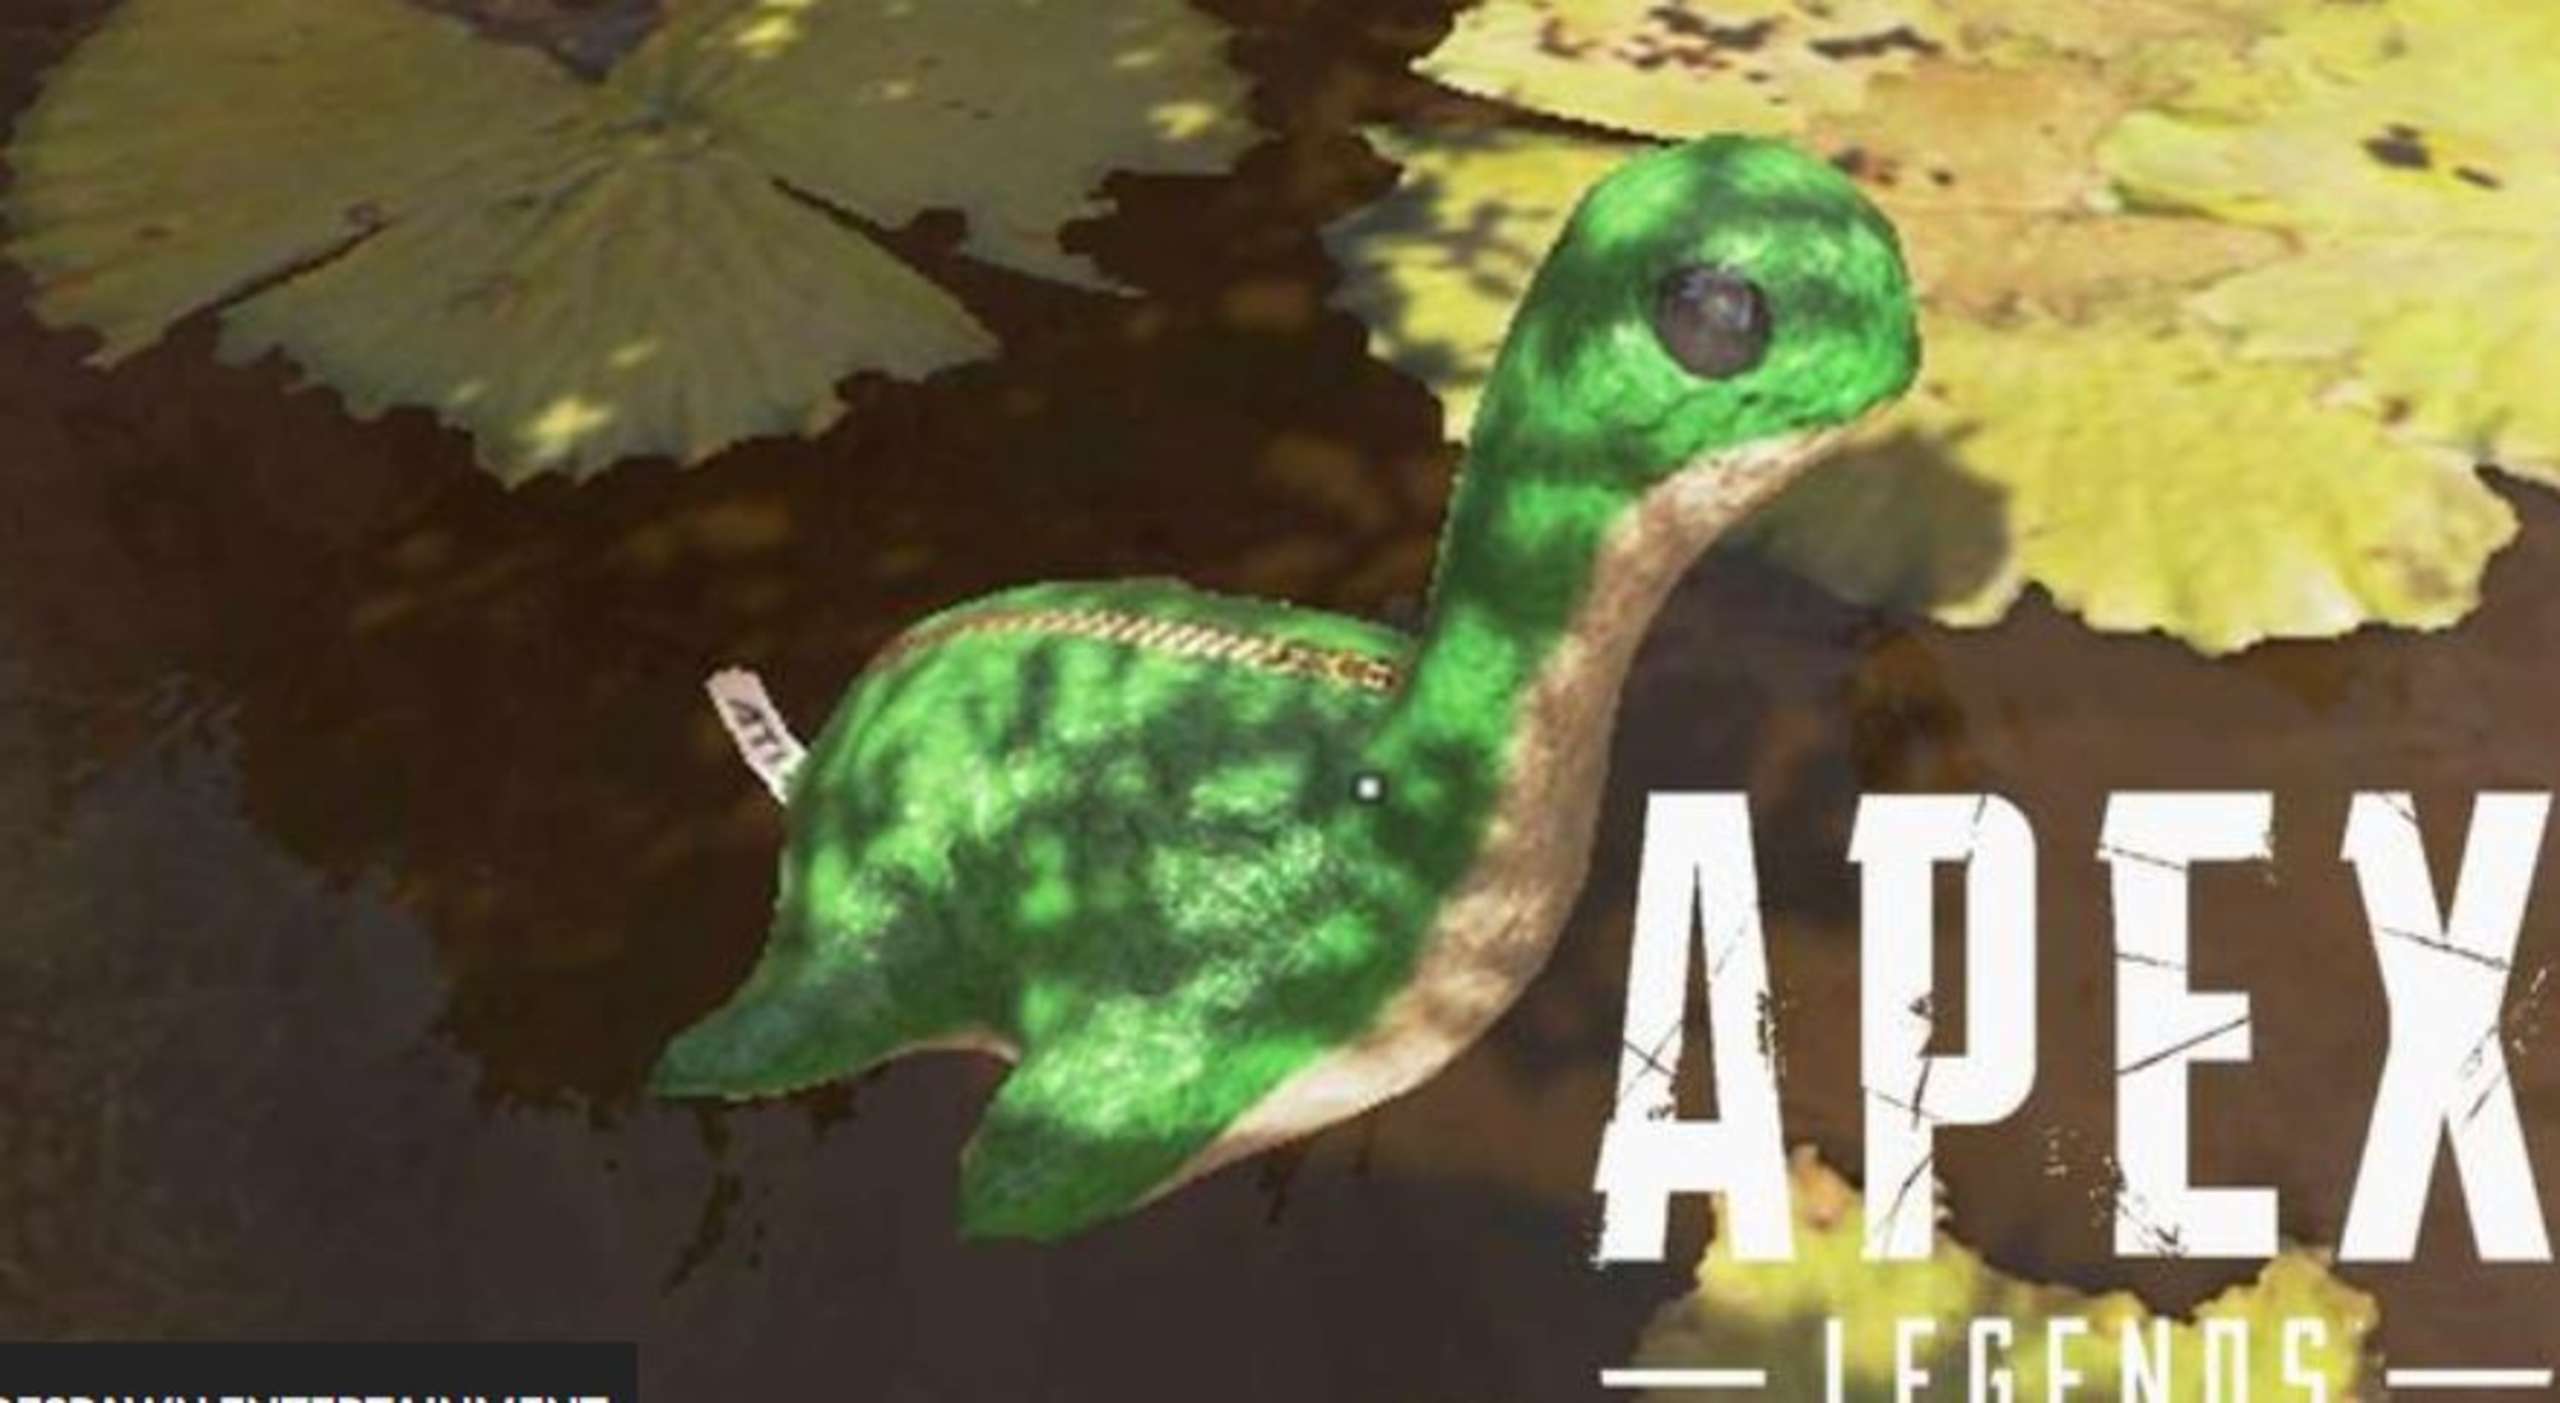 Some Players In Apex Legends’ Latest Limited-Time Mode LTM, Gun Run, Have Stumbled Onto An Easter Egg Involving The Stuffed Dinosaur Nessie